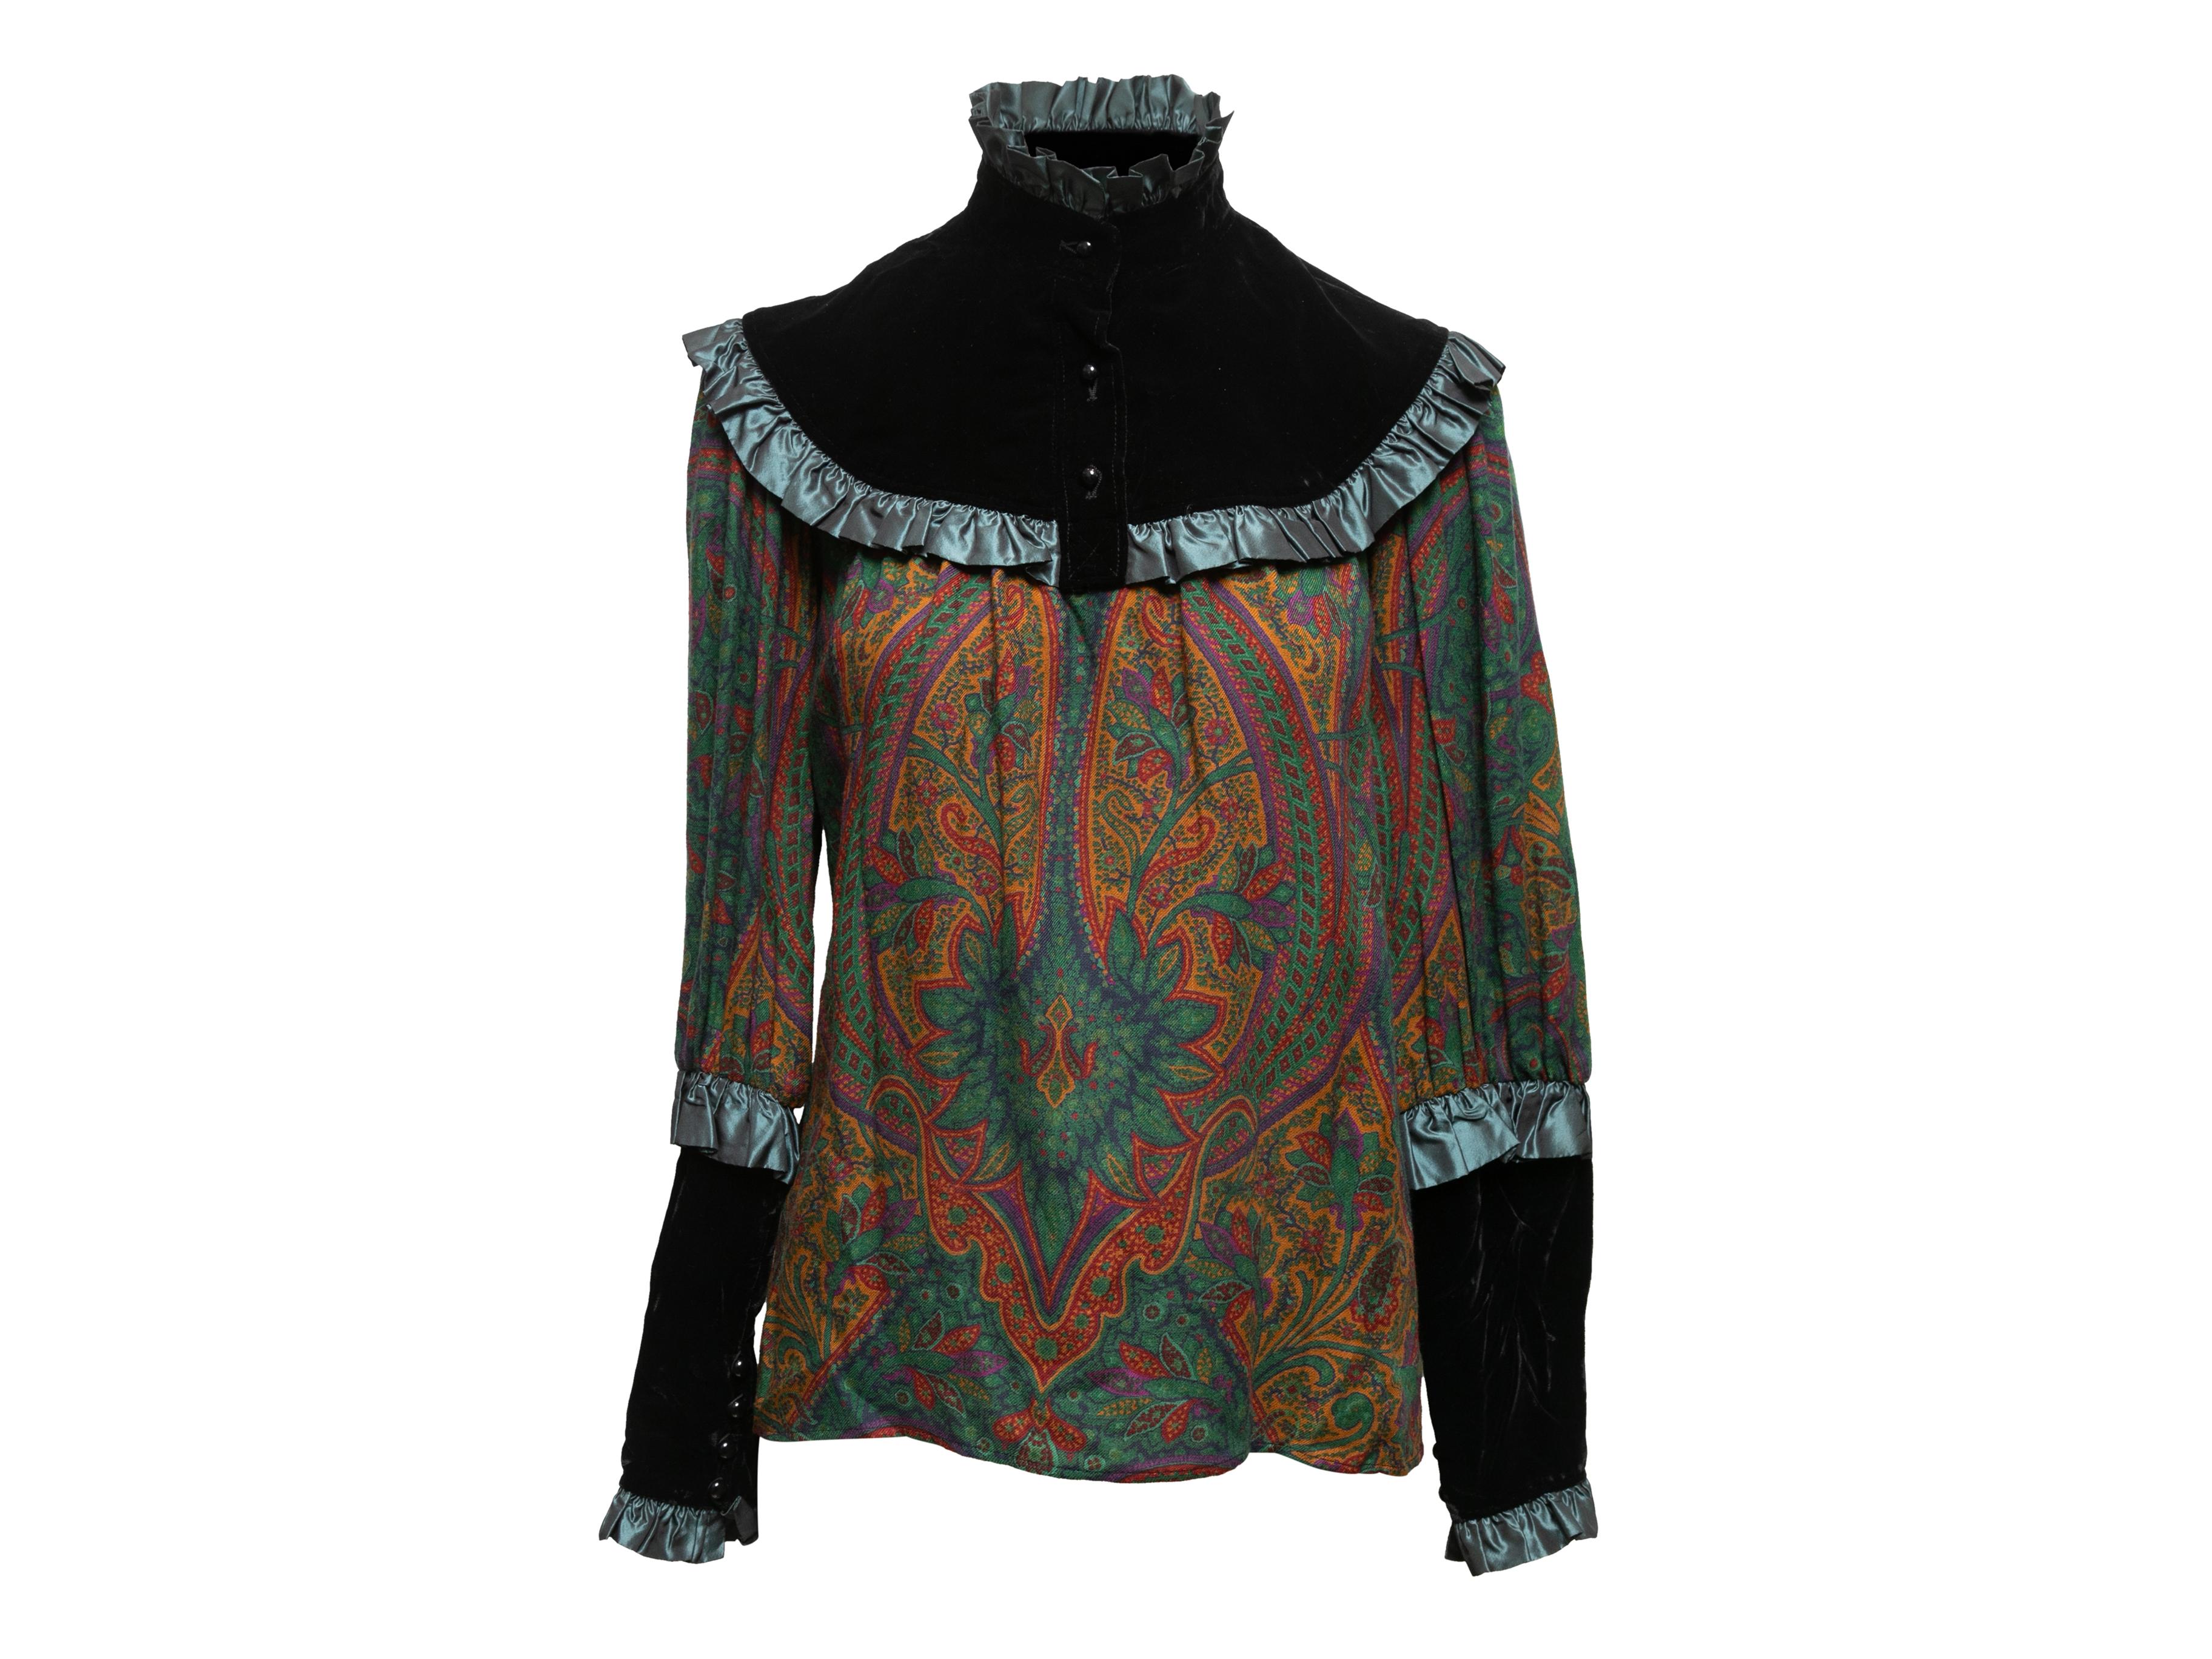 Vintage black and multicolor velvet and paisley long sleeve blouse by Saint Laurent. From the 1976 Russian Collection. Ruffle trim throughout. Stand collar. Front button closures at neck. 36